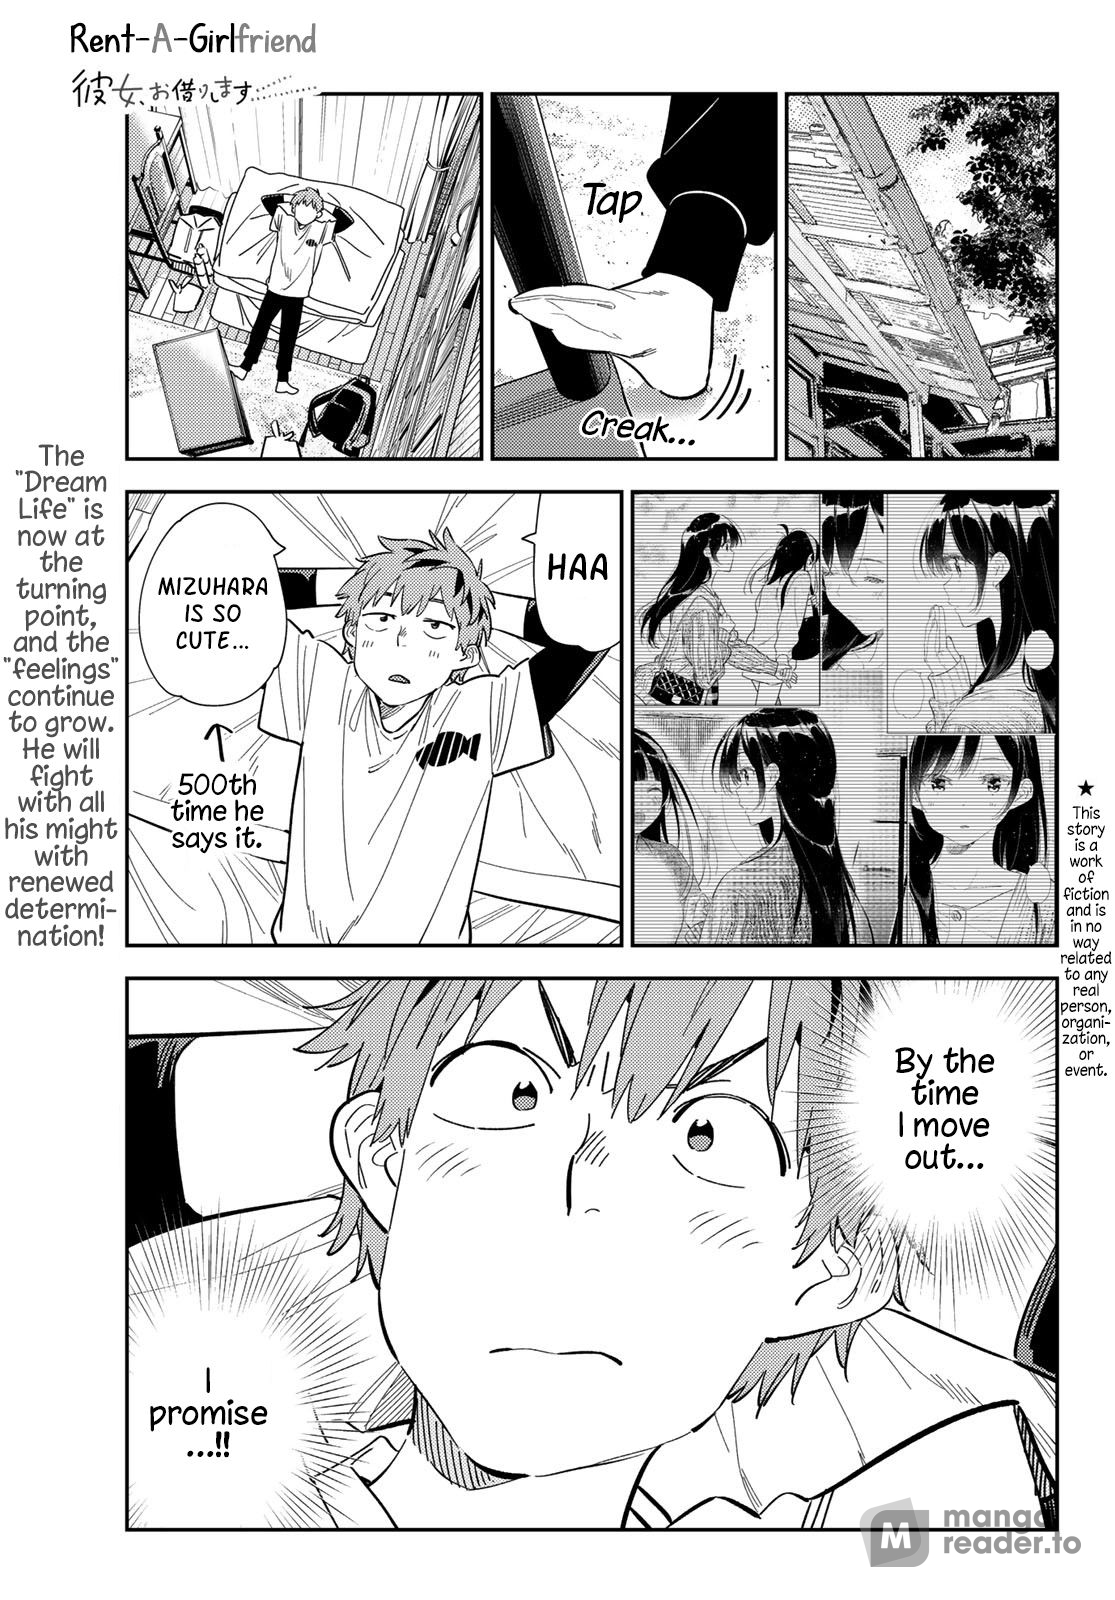 Rent-A-Girlfriend, Chapter 281 image 01